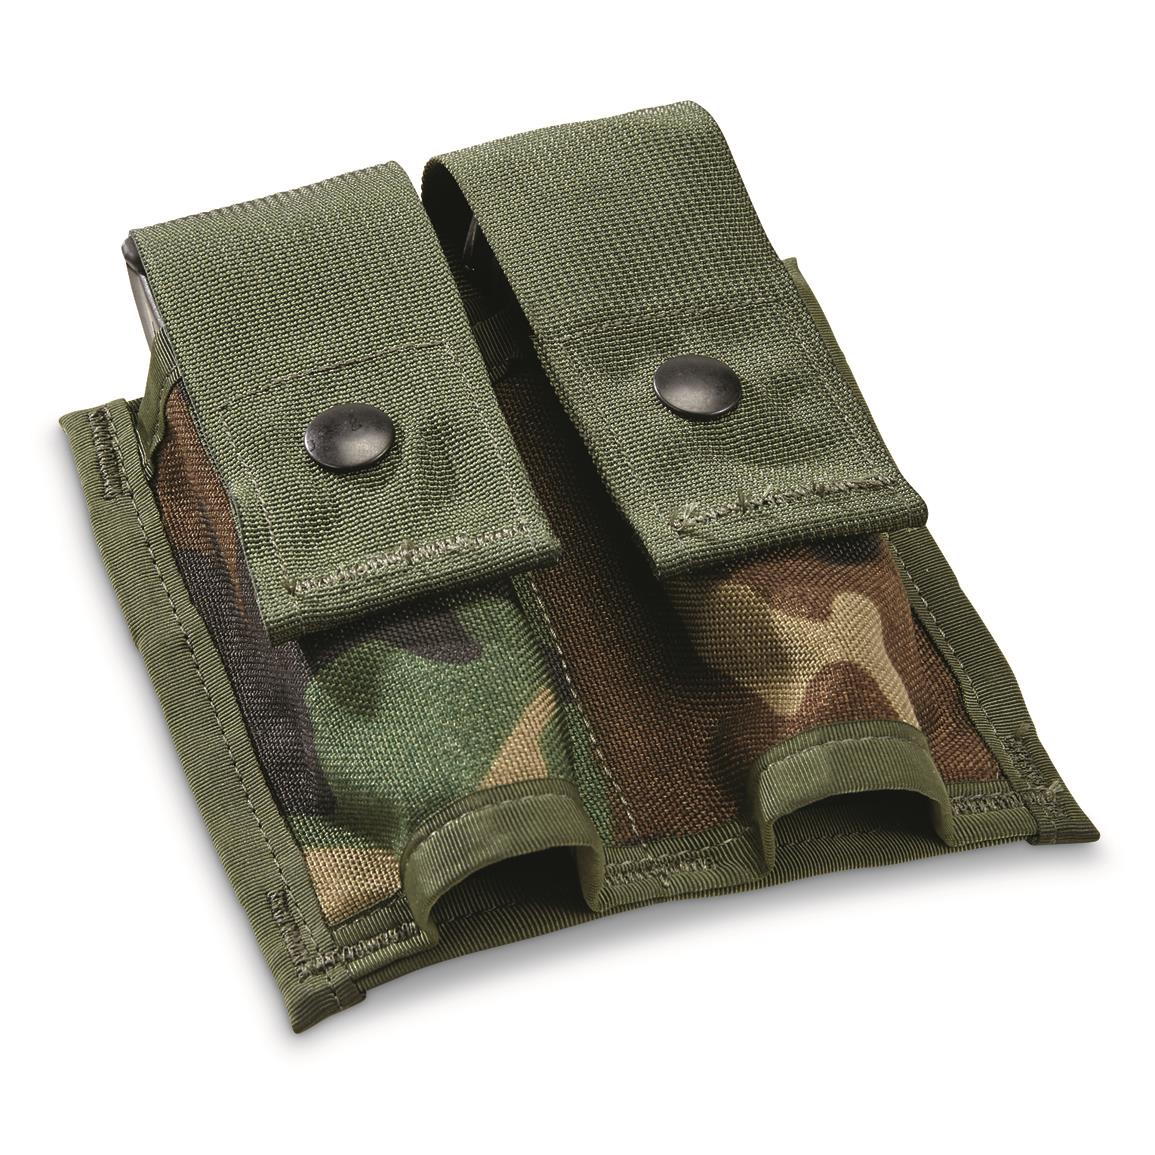 NEW Details about   Genuine British Army Issue 40mm 11 Pouch Grenade Bandolier Woodland Camo 